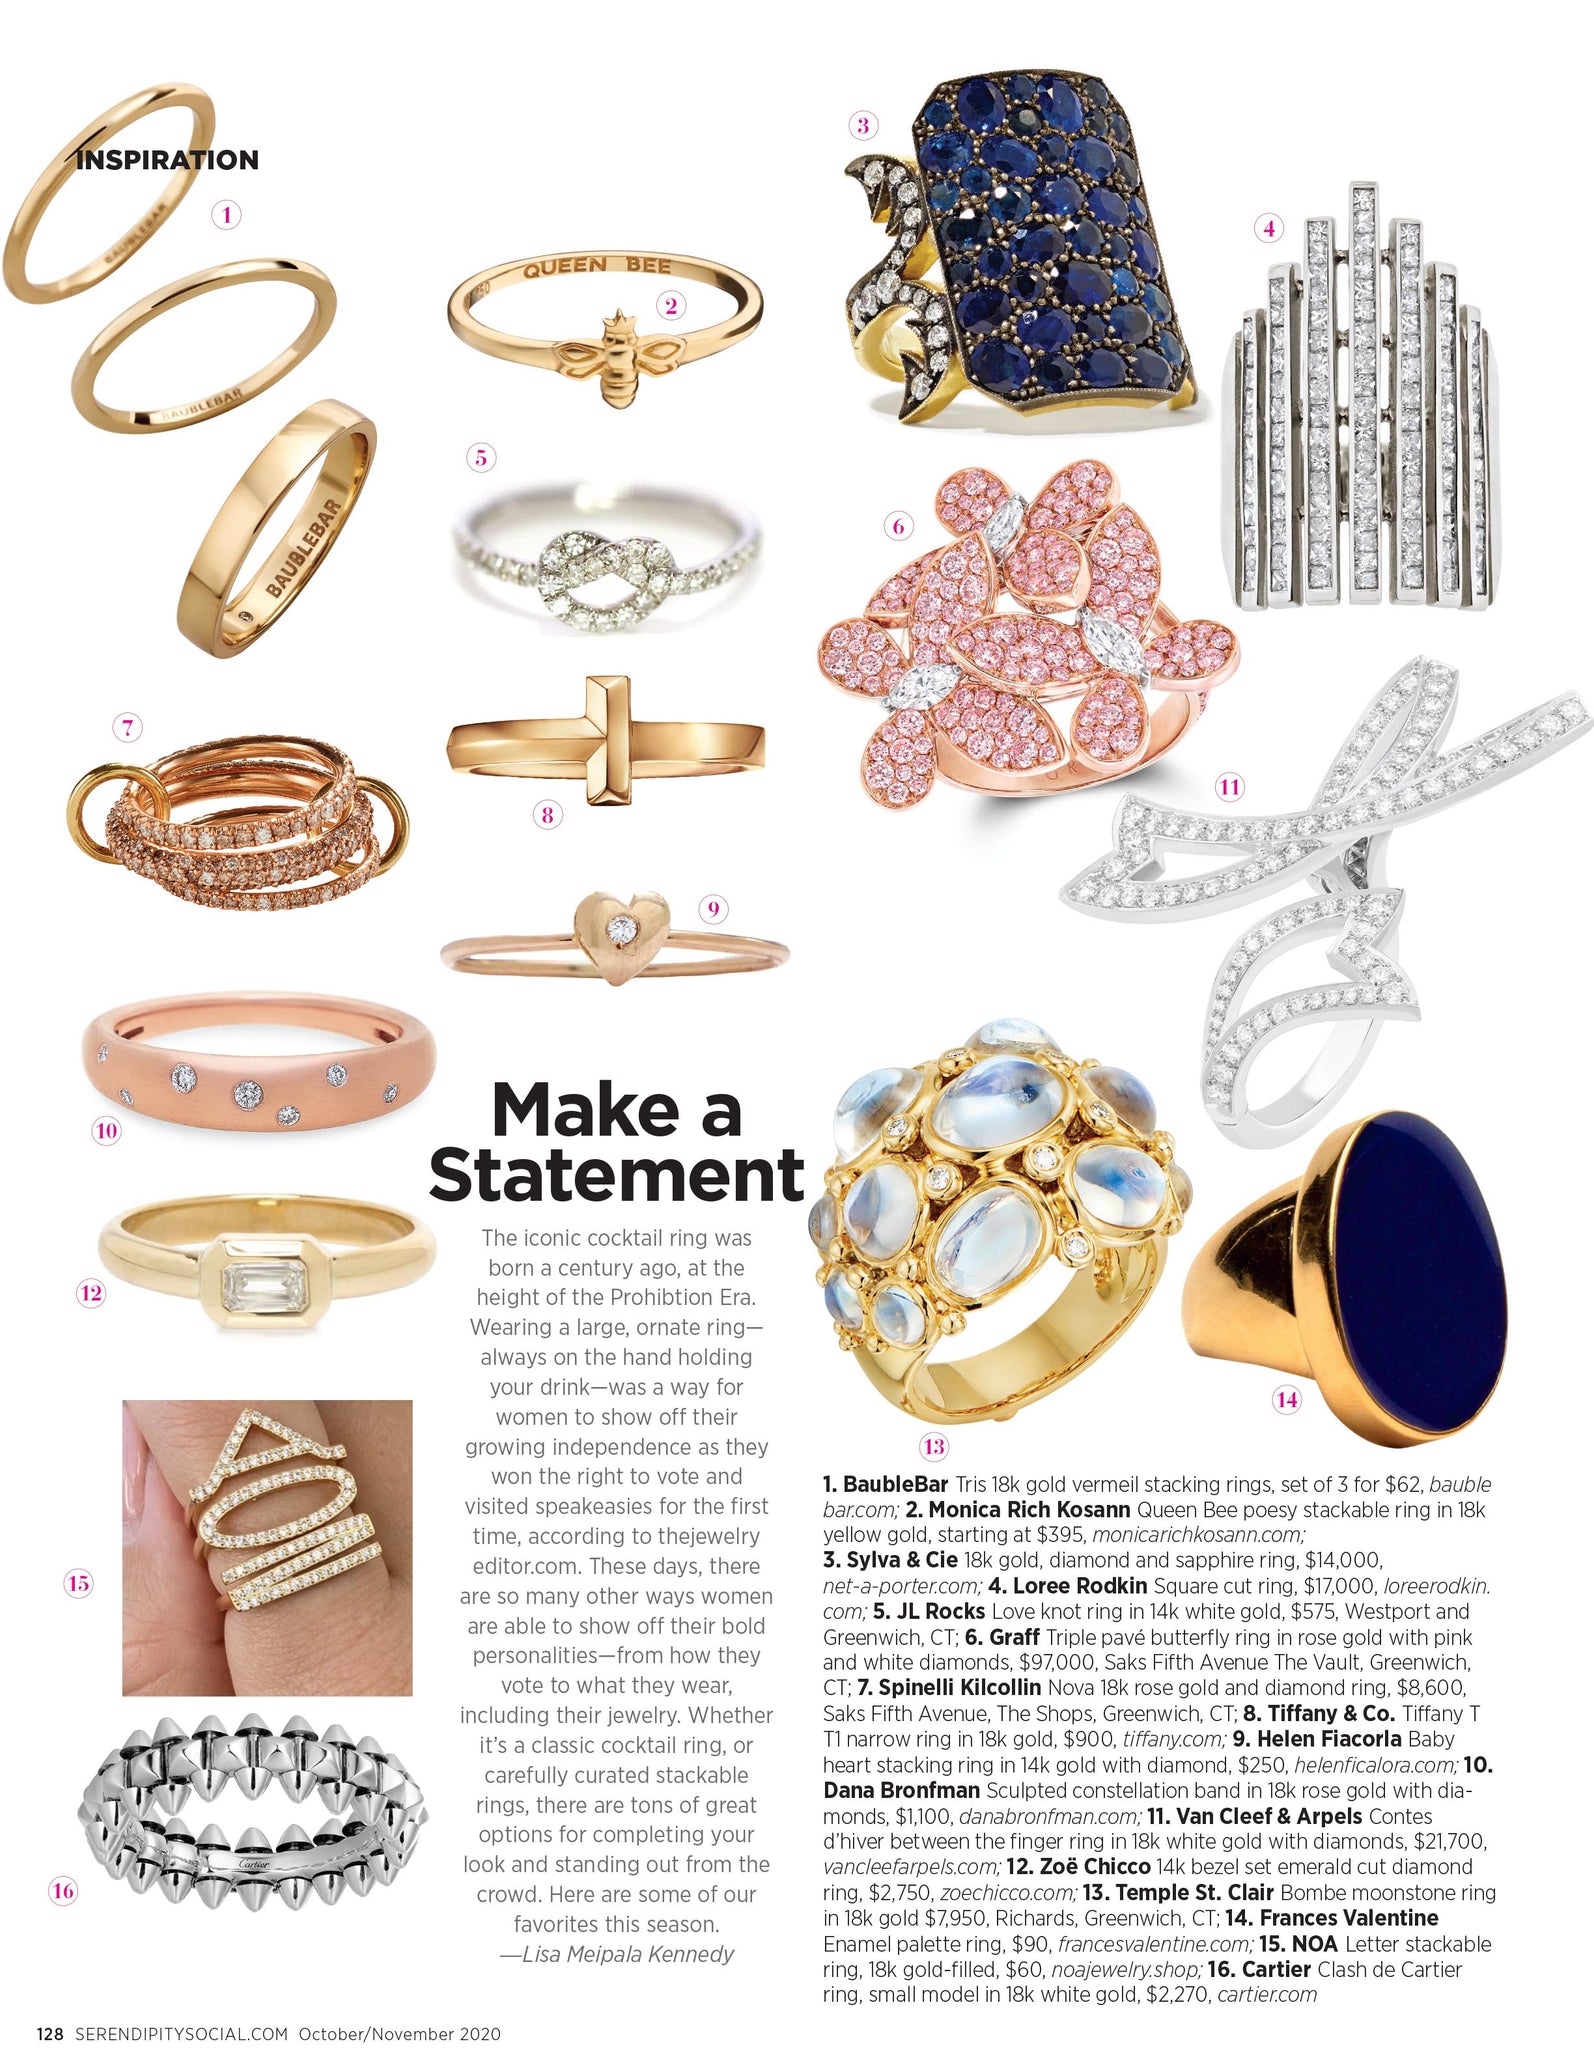 Dana Bronfman Sculpted Constellation Band featured in Serendipity October 2020 magazine